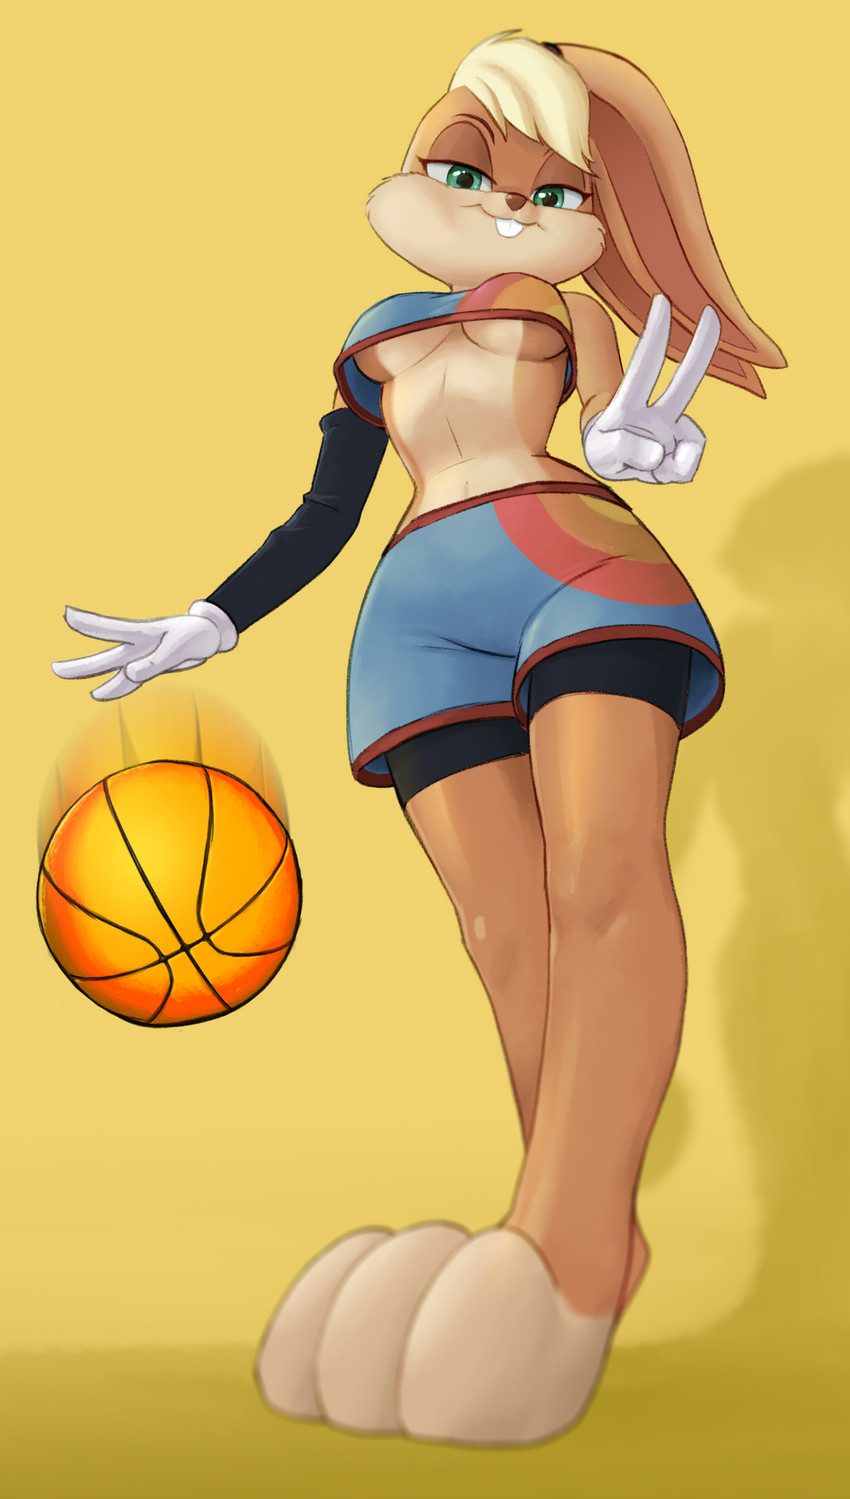 lola bunny (space jam: a new legacy and etc) created by pencils (artist)